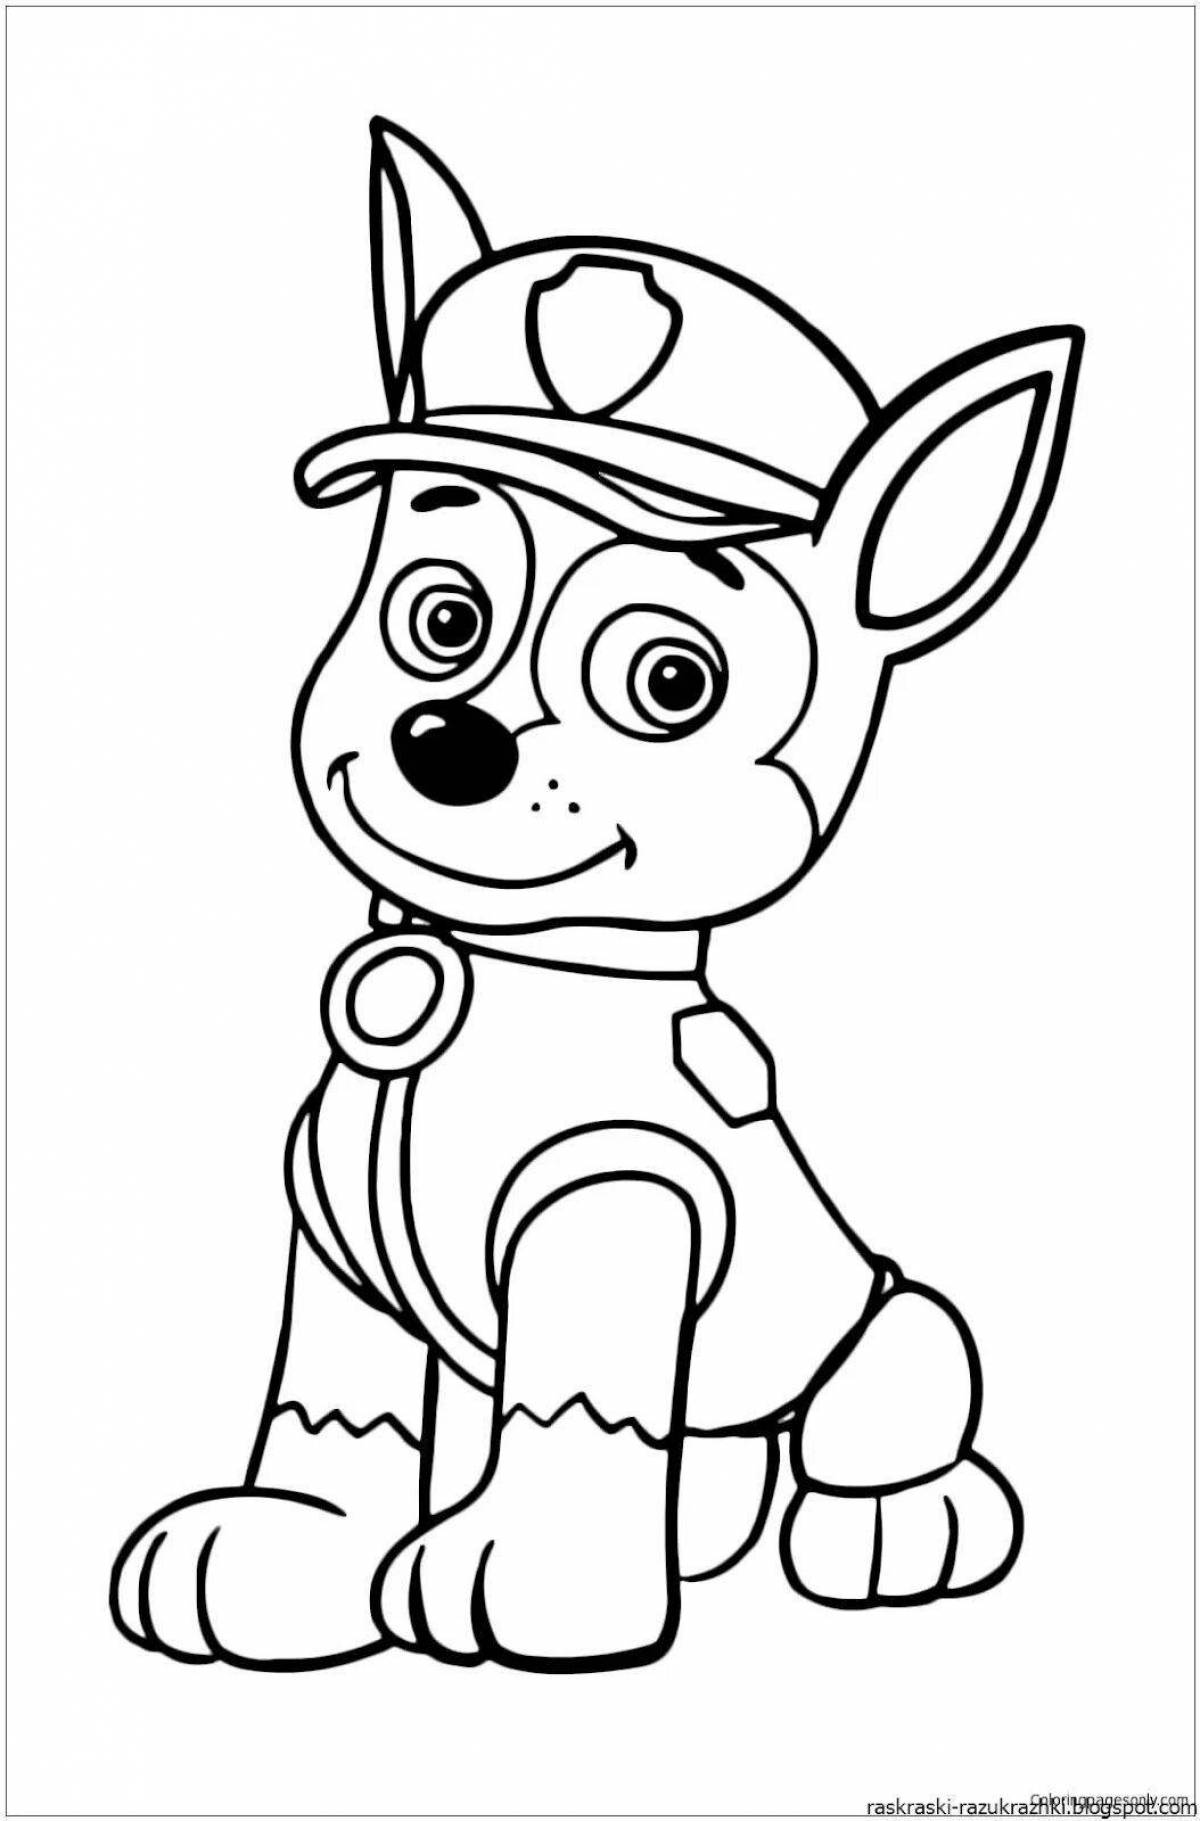 Racing puppy coloring page